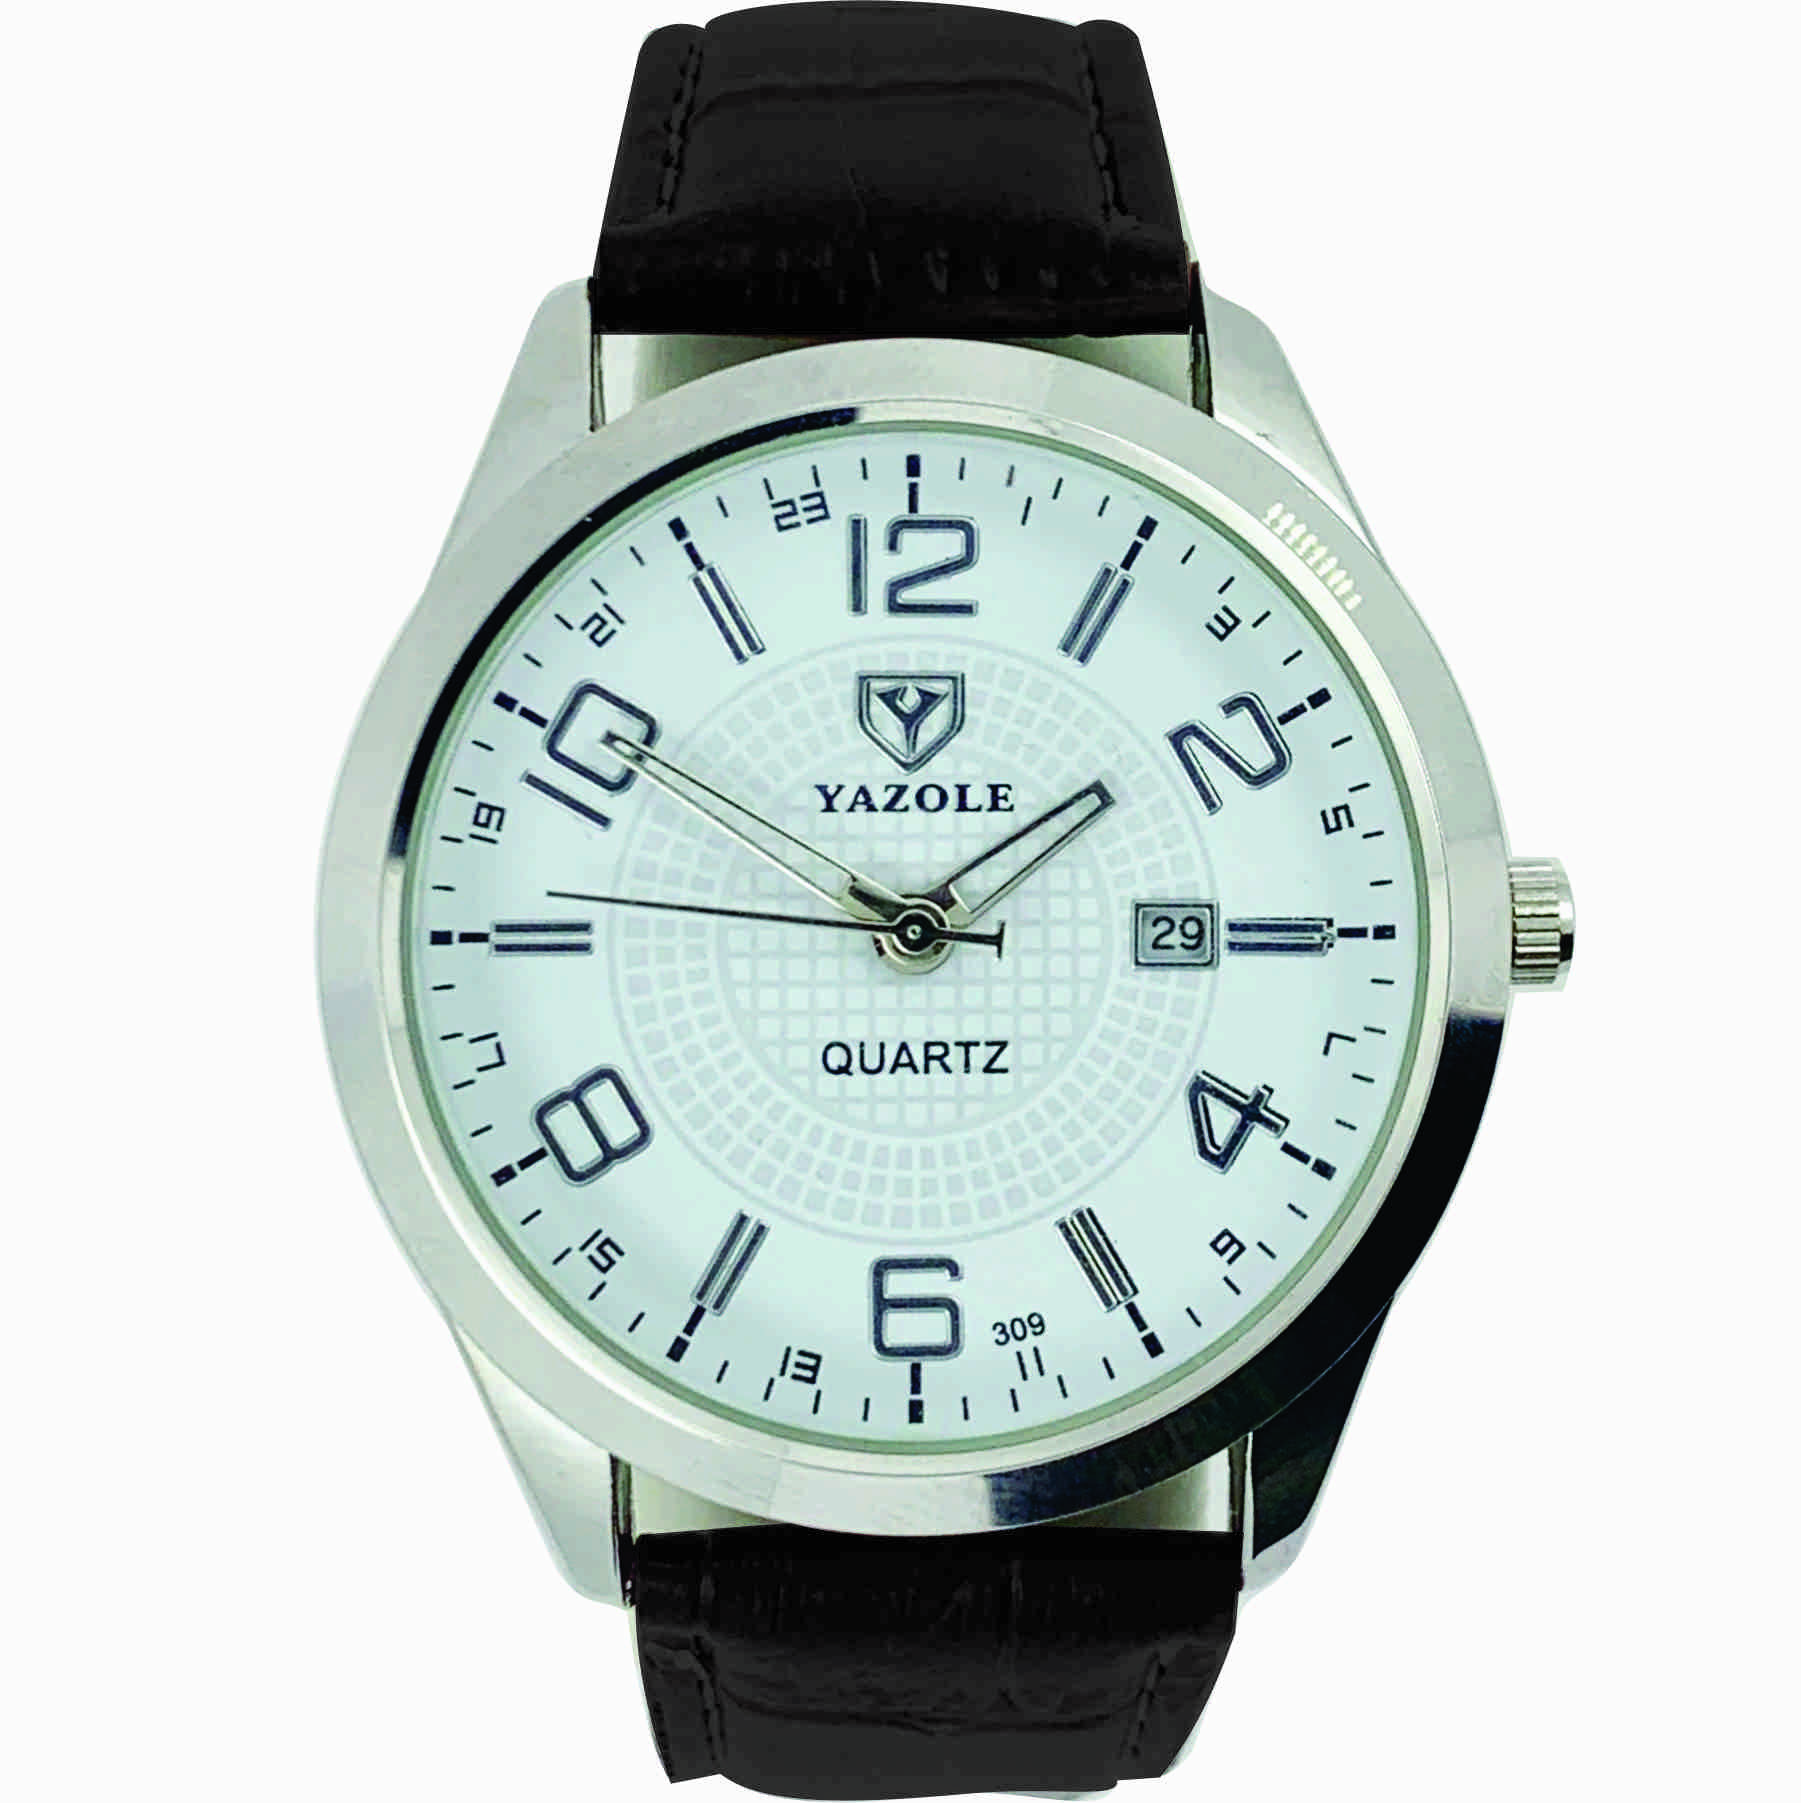 Mens Band Watch - Global Black with Date